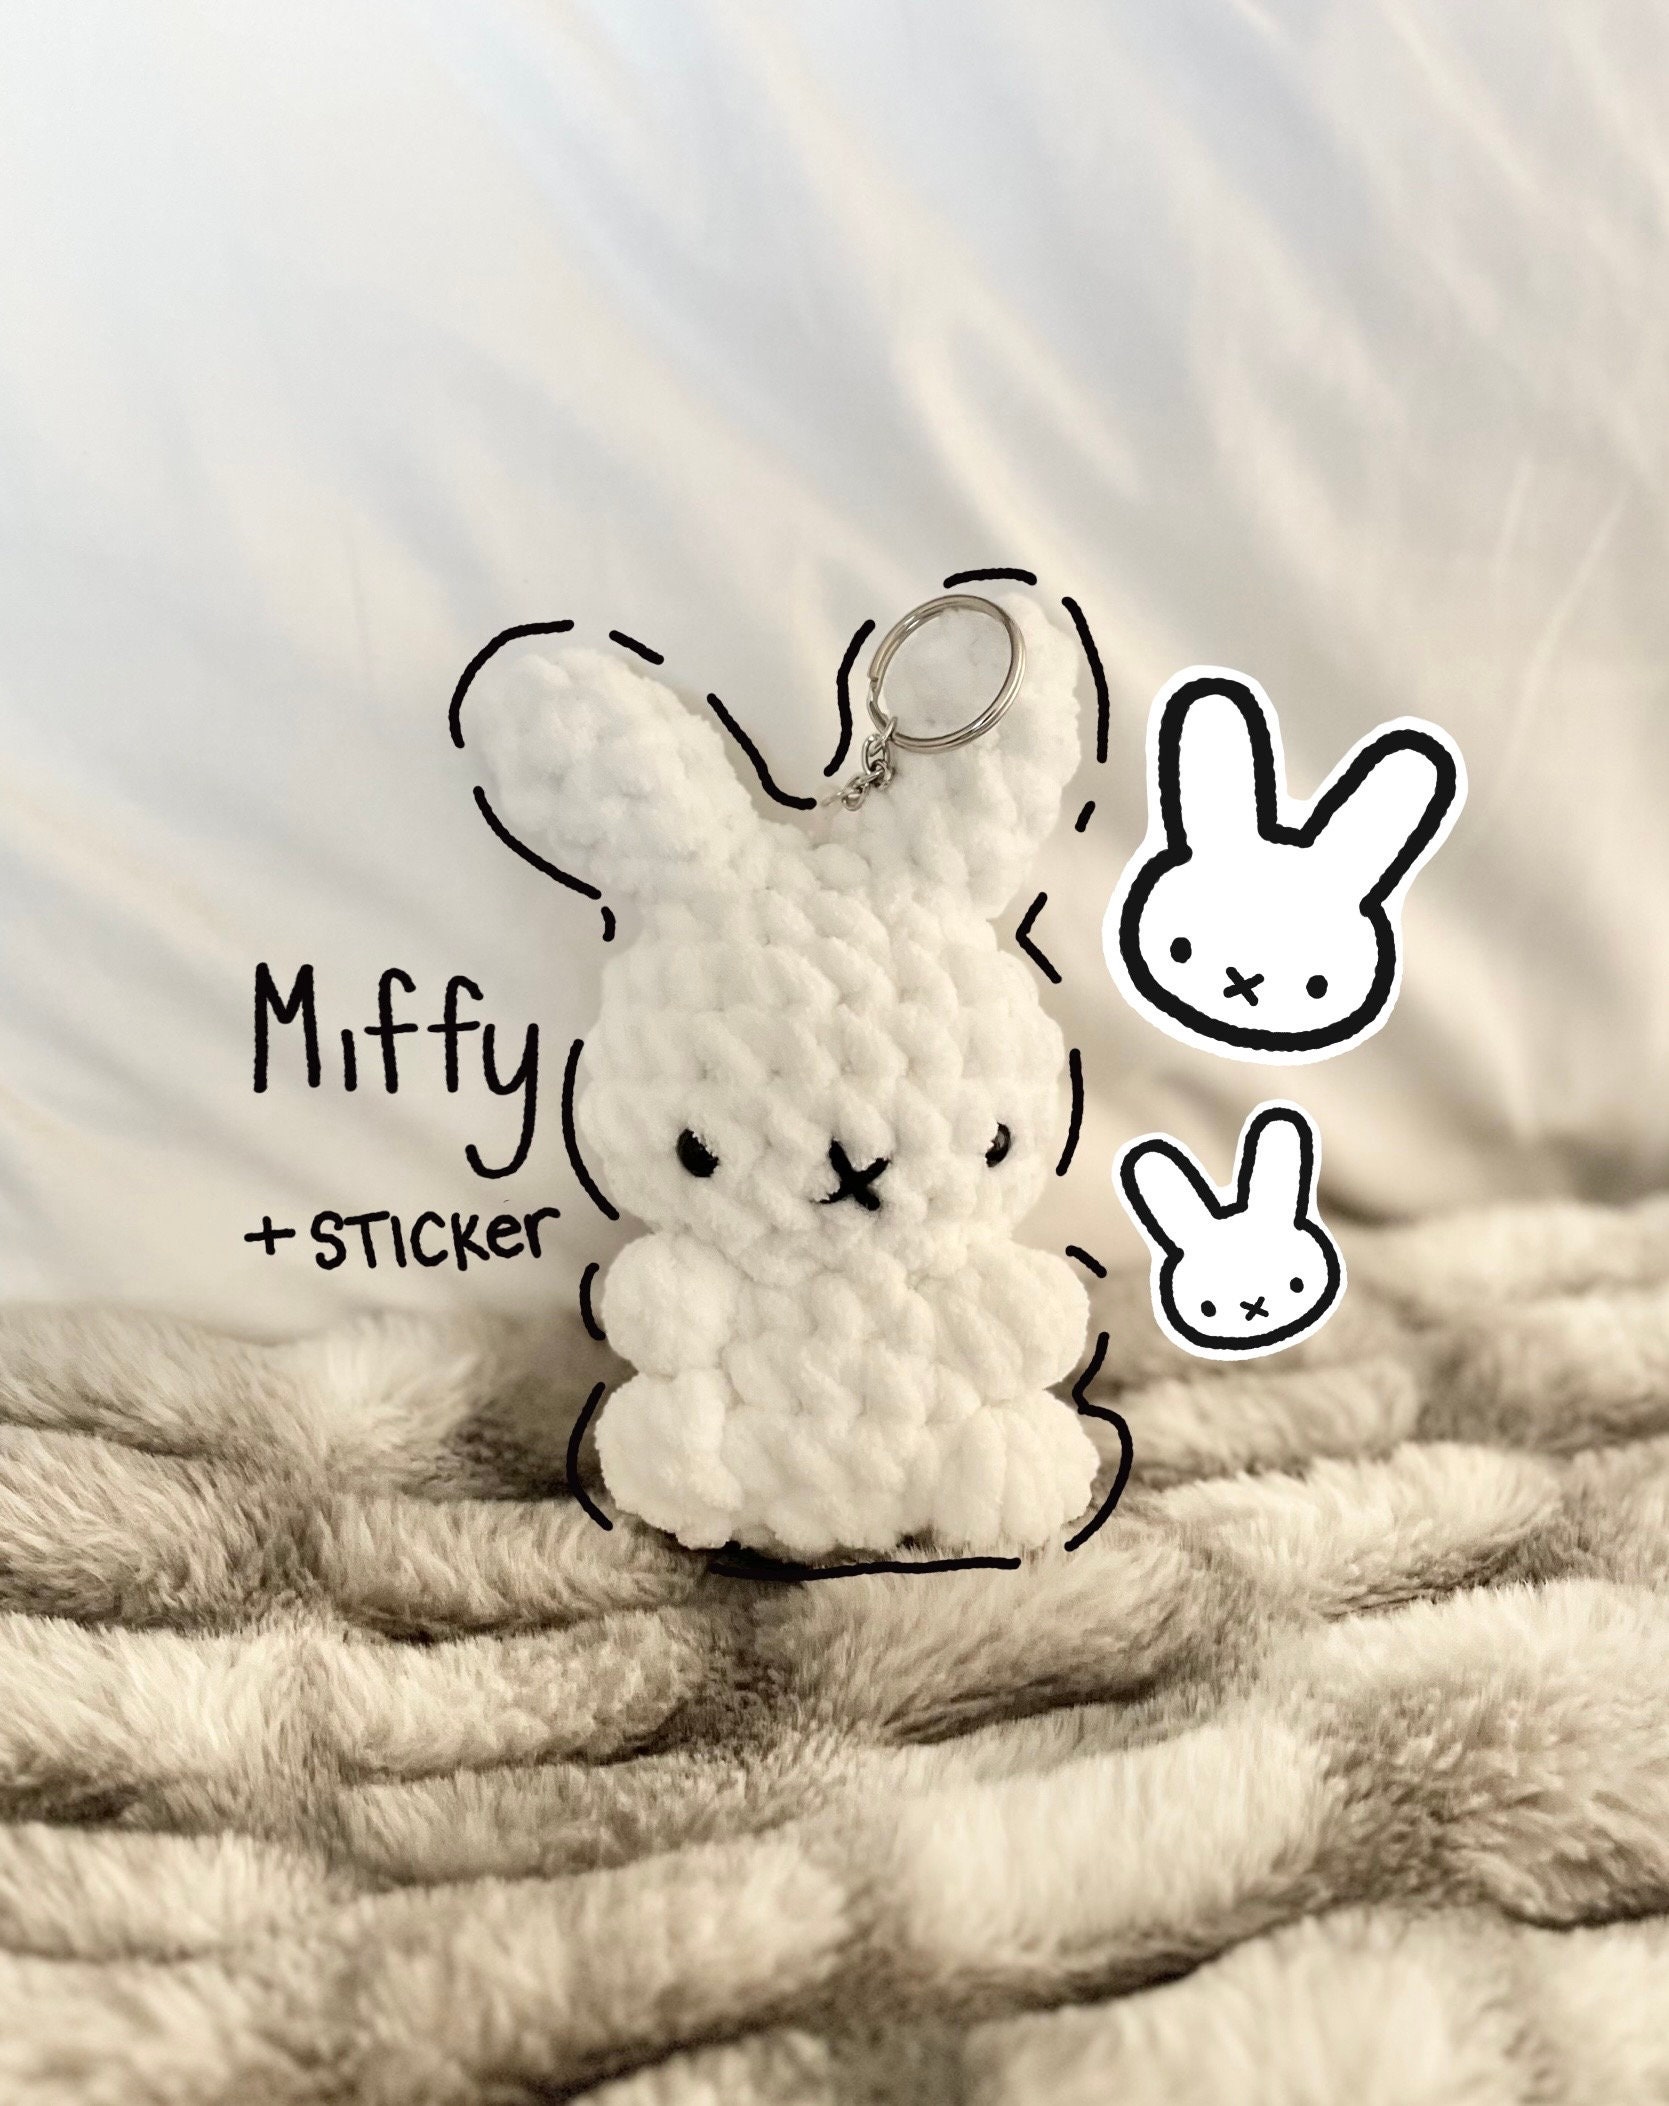 Buy Miffy miffy key chain key holder SAND mascot from Japan - Buy authentic  Plus exclusive items from Japan